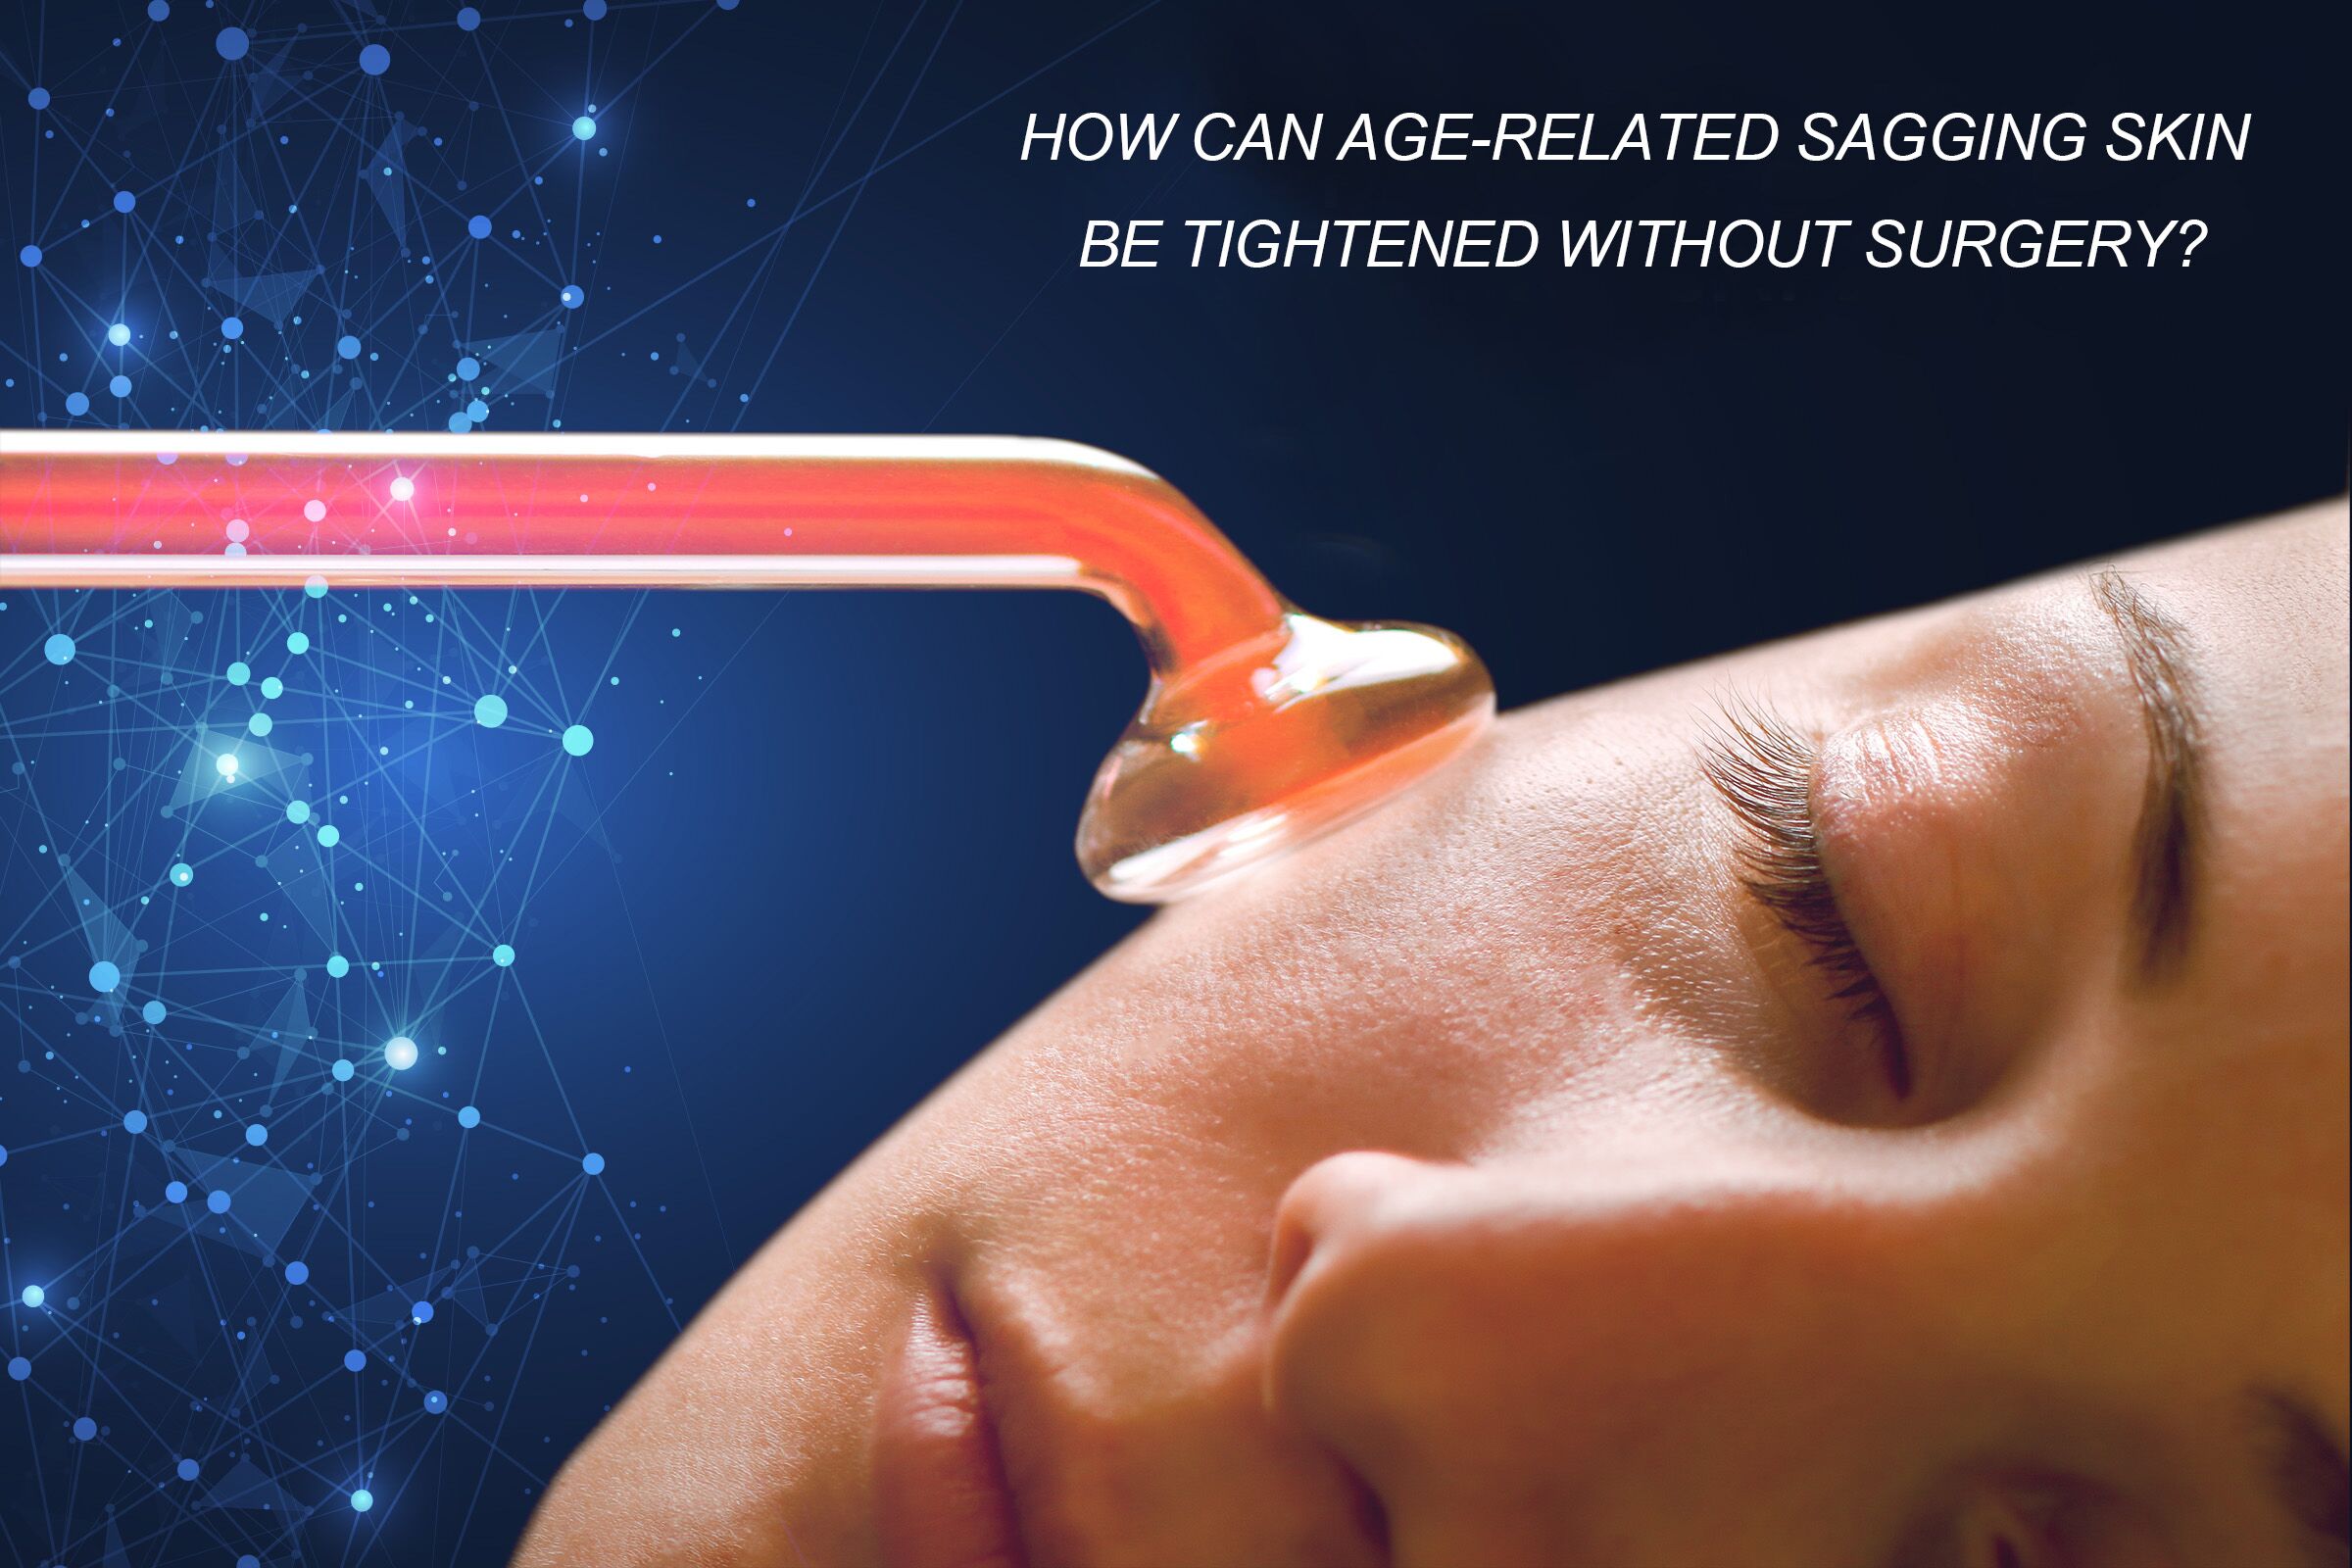 How Can Age-related Sagging Skin Be Tightened Without Surgery